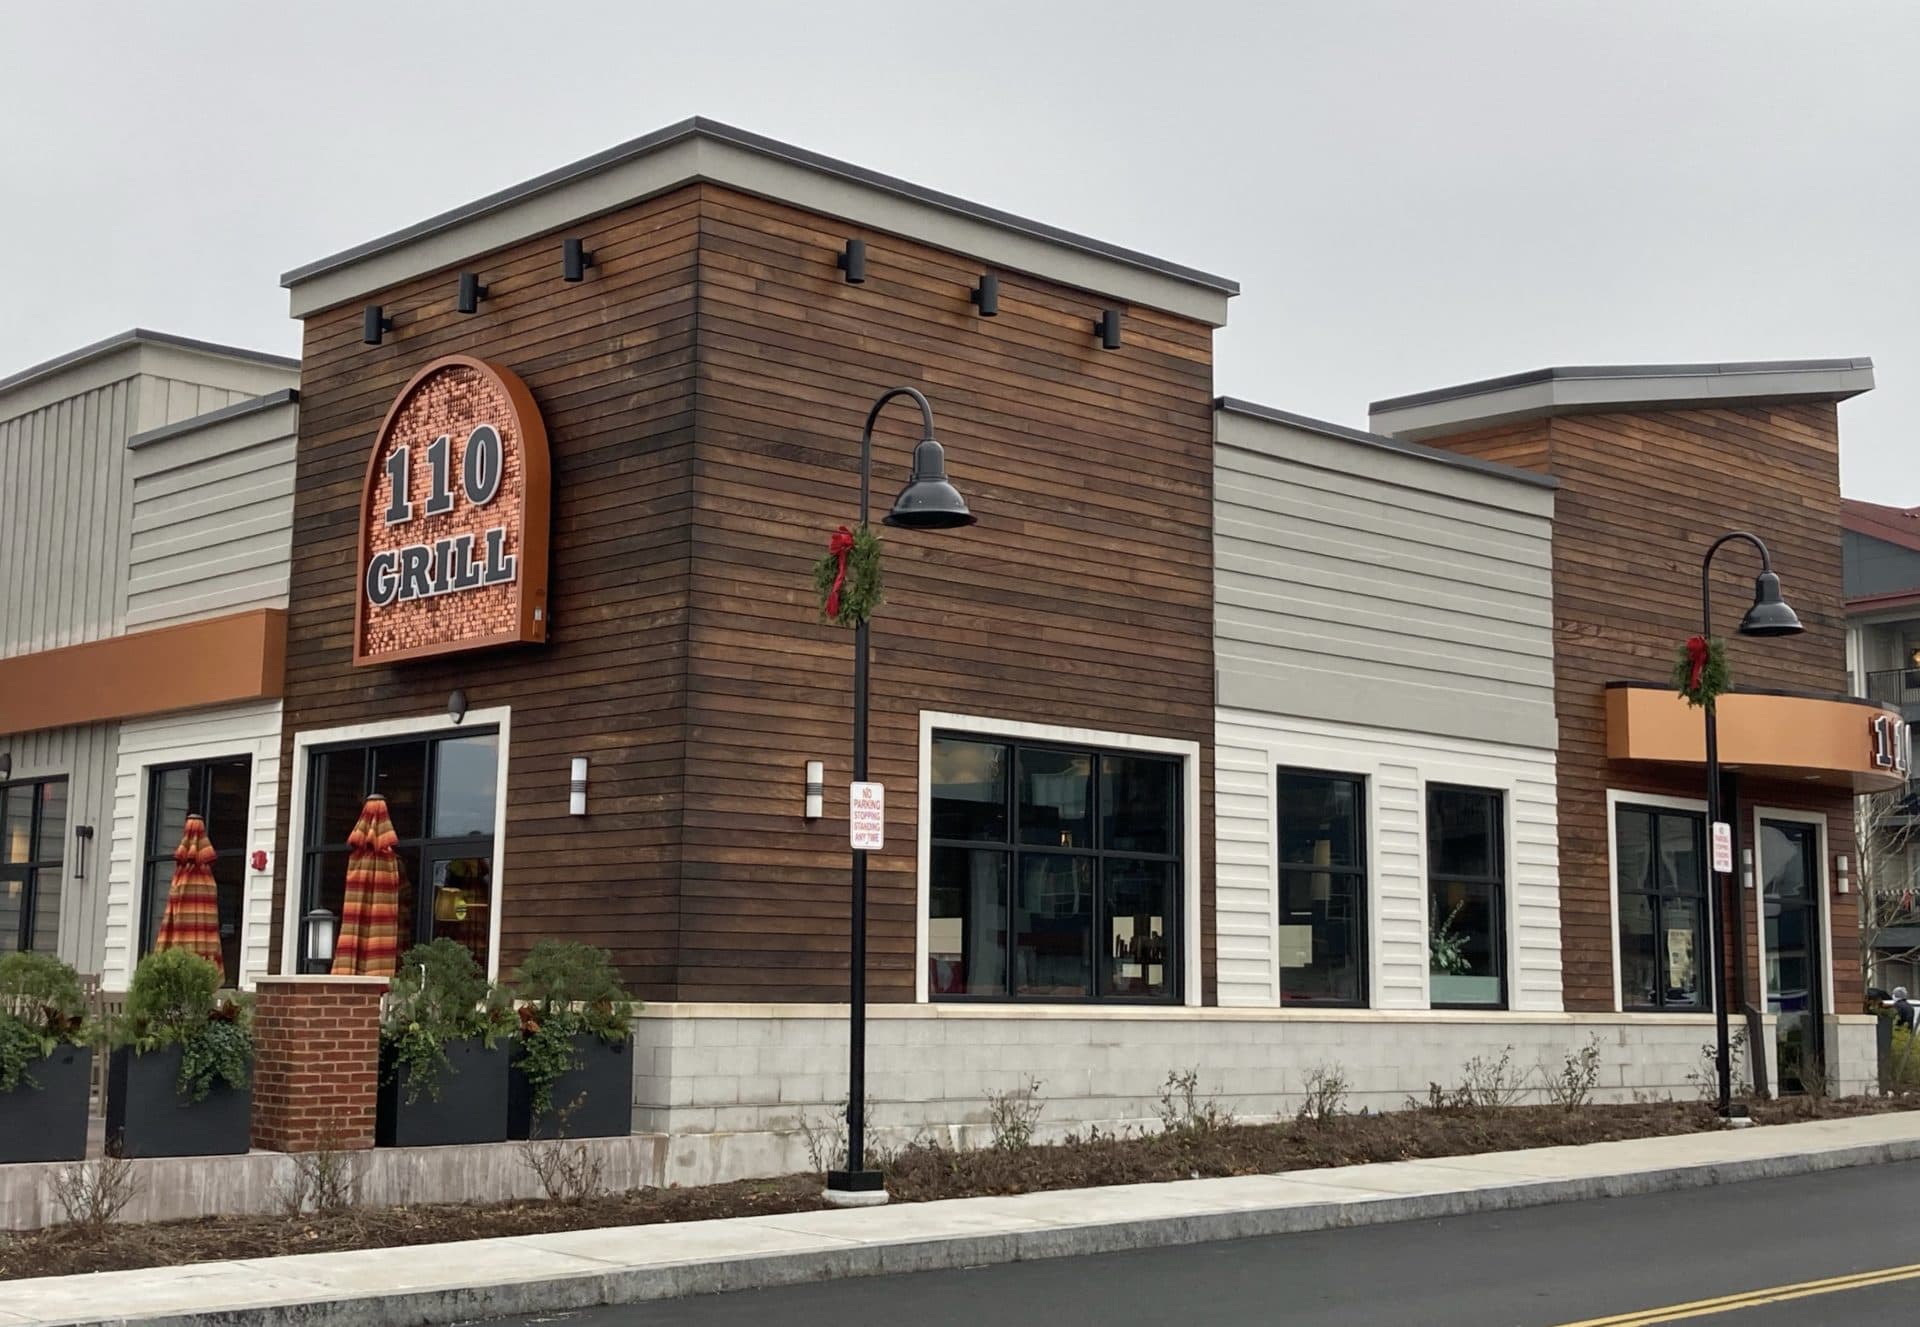 The state received several complaints about workplace safety at 110 Grill in Saugus after an employee tested positive for COVID-19. (Shannon Dooling/WBUR)